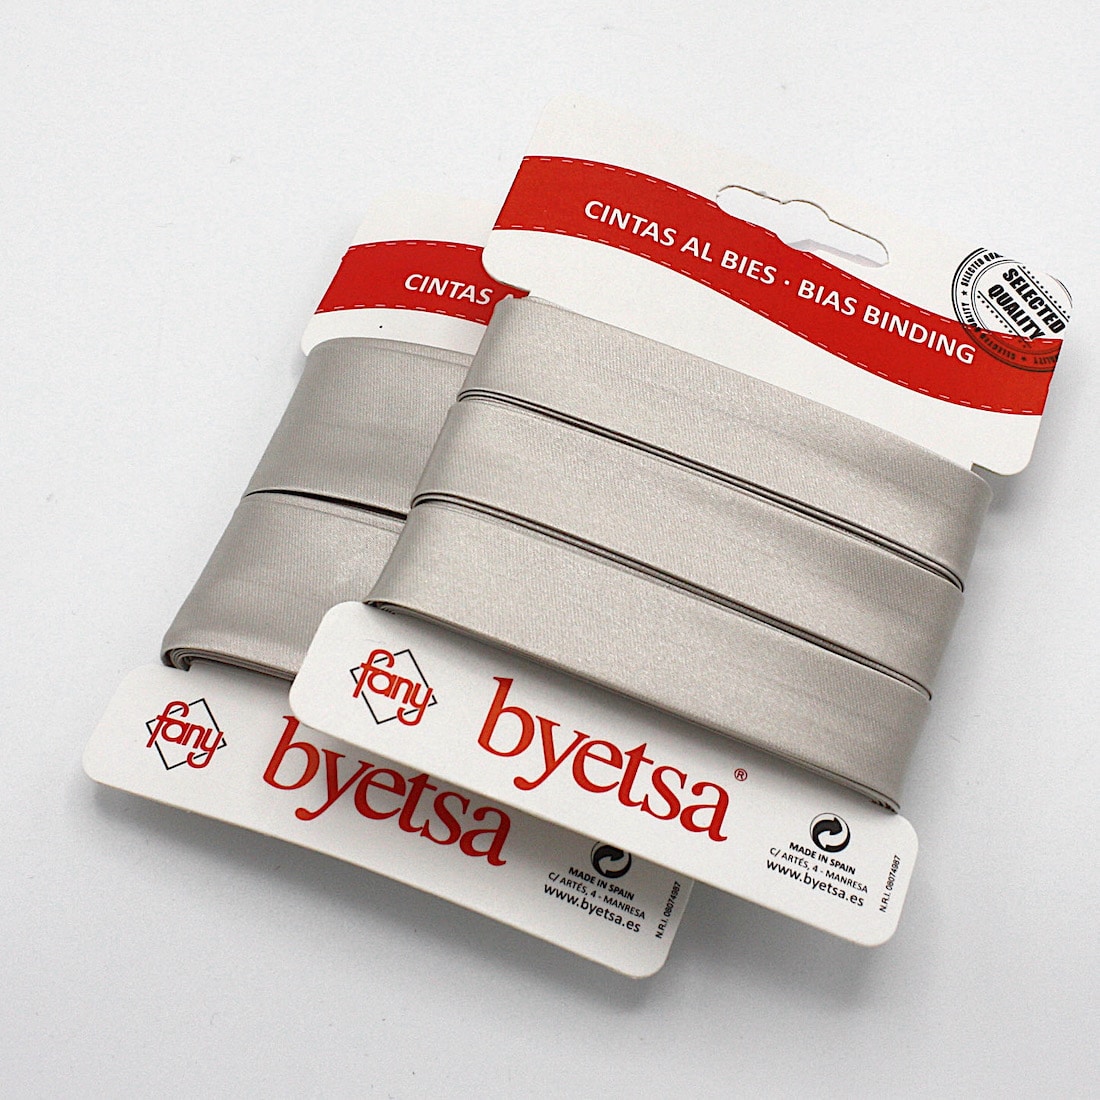 5 metres of Pre-packed Satin Bias Binding Tape in 18mm and 30mm width in Oyster 10